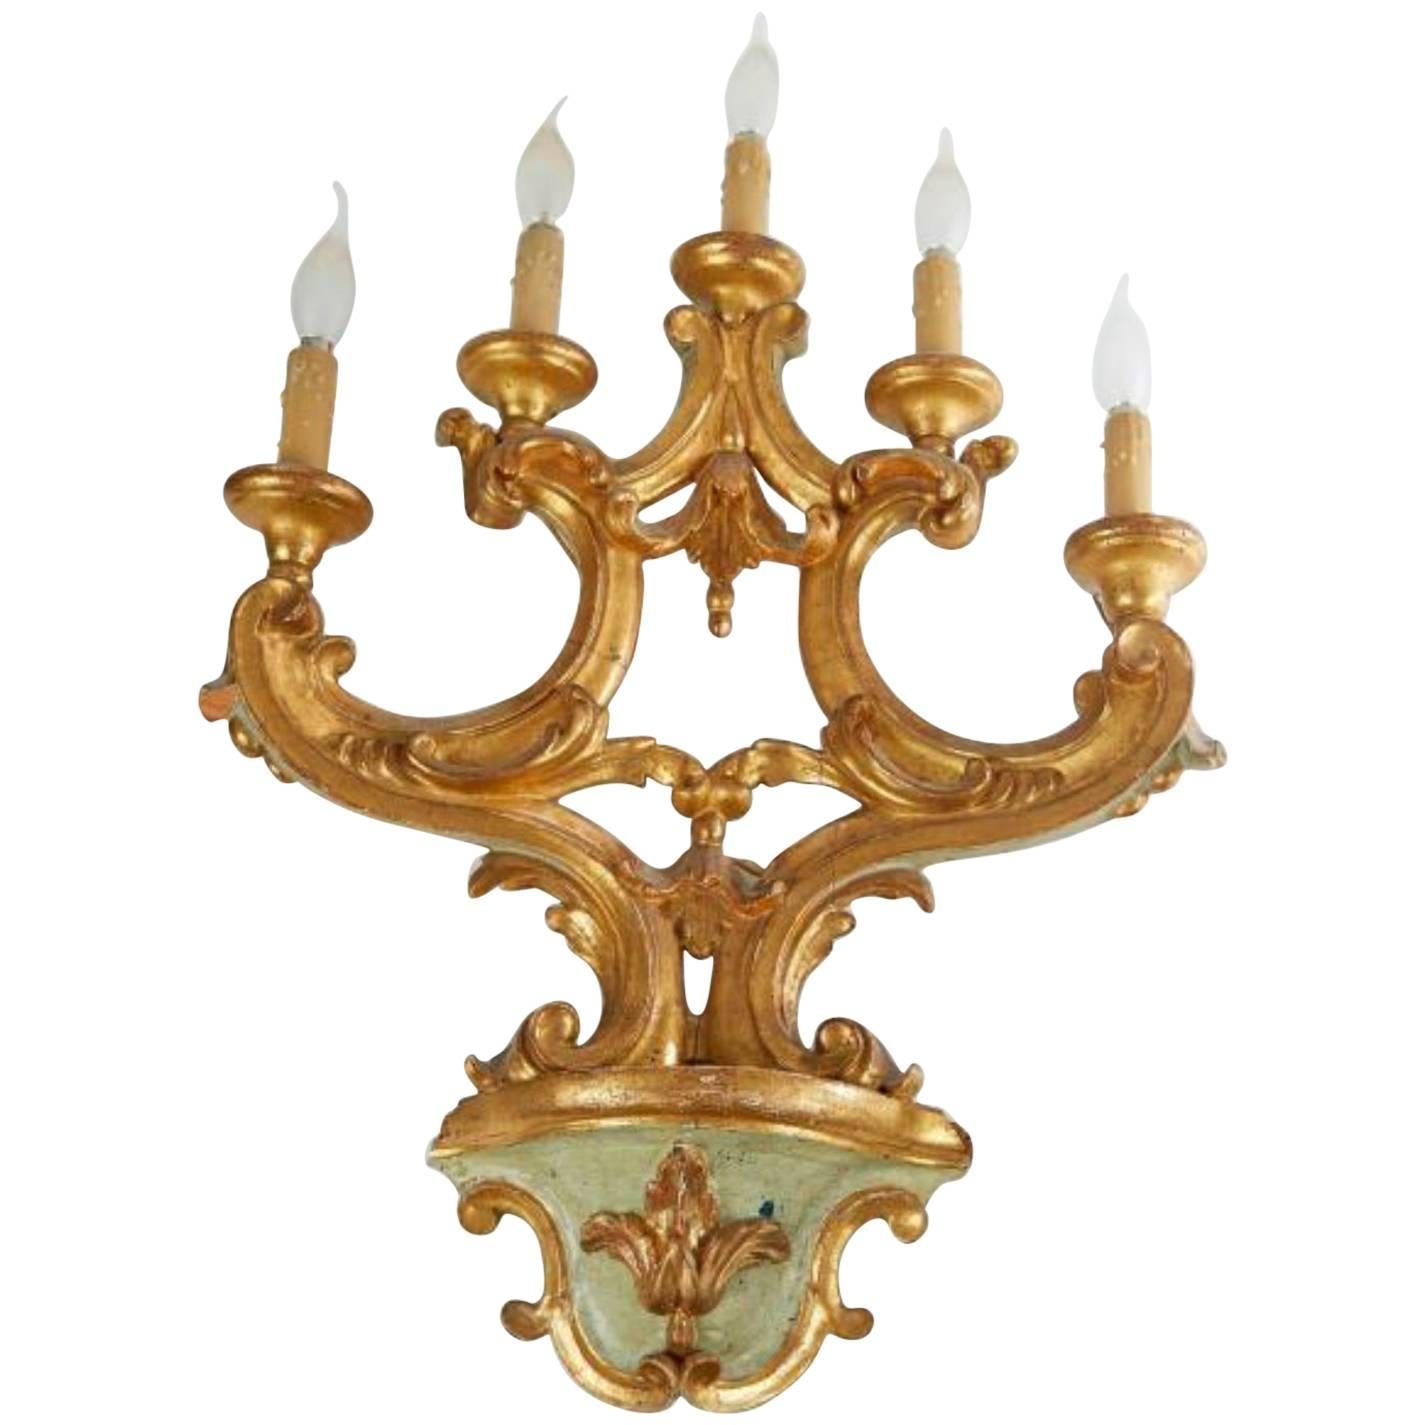 Magnificent 19th Century French Hand-Carved Painted Wood Sconce